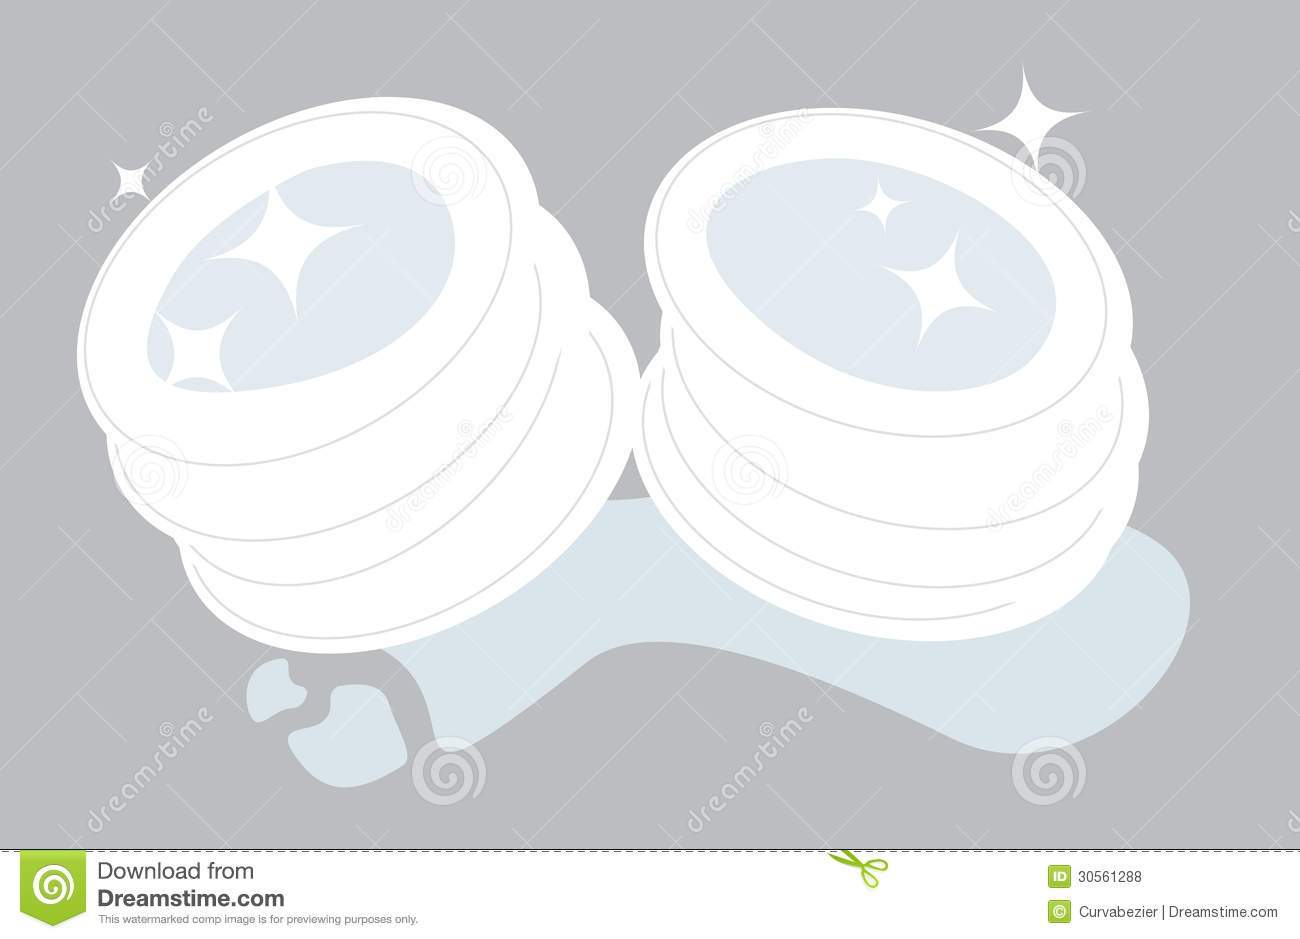 Clean Dishes Royalty Free Stock Photos   Image  30561288